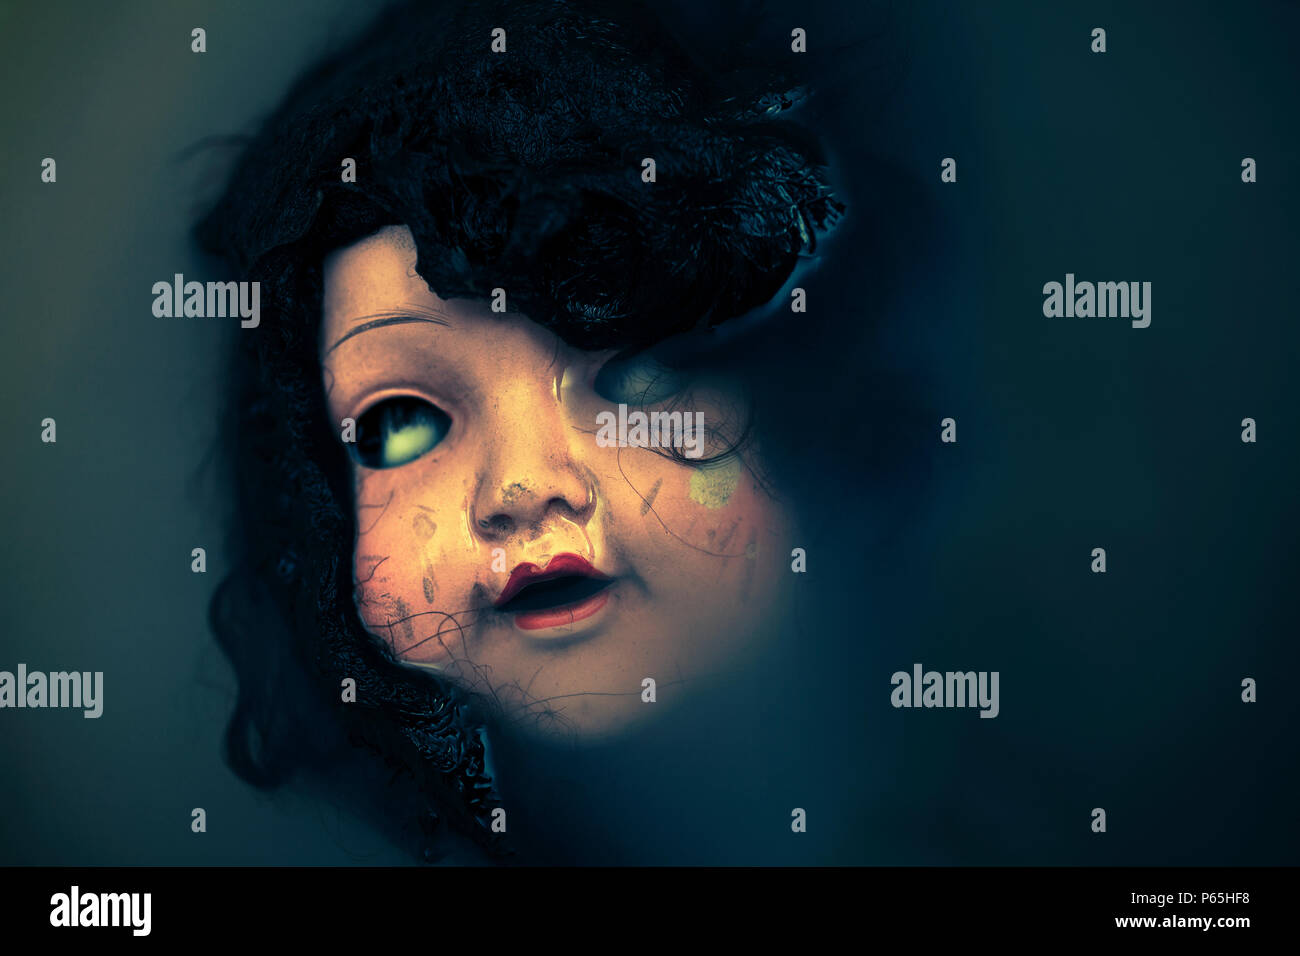 Creepy doll face in dark dirty water Stock Photo